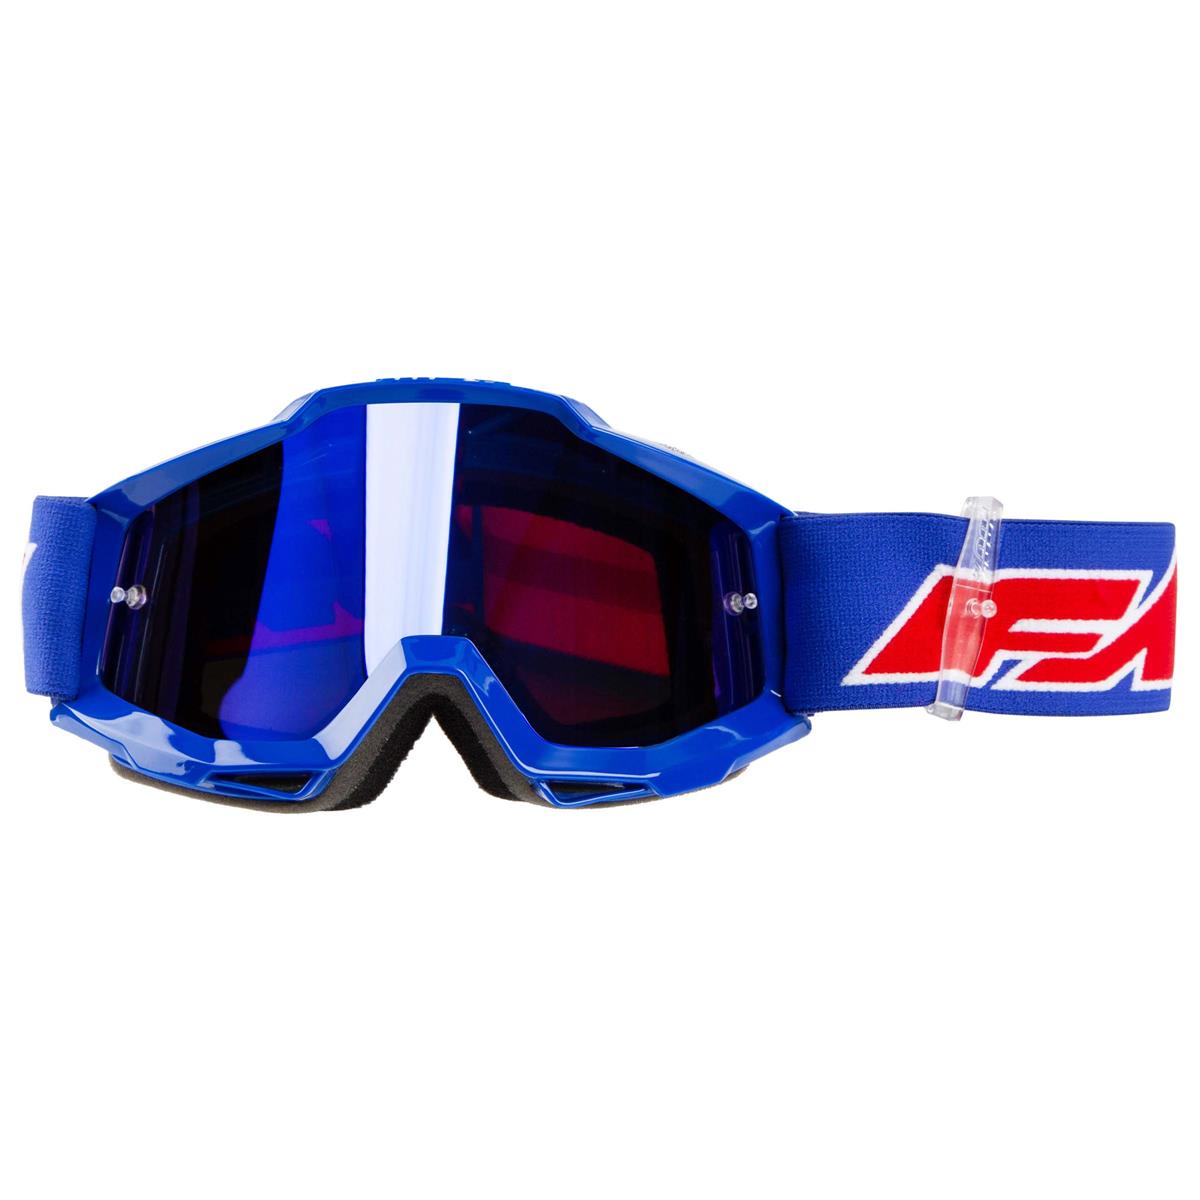 FMF Youth Powerbomb Goggles Rocket Blue w/ Blue Mirror Lens